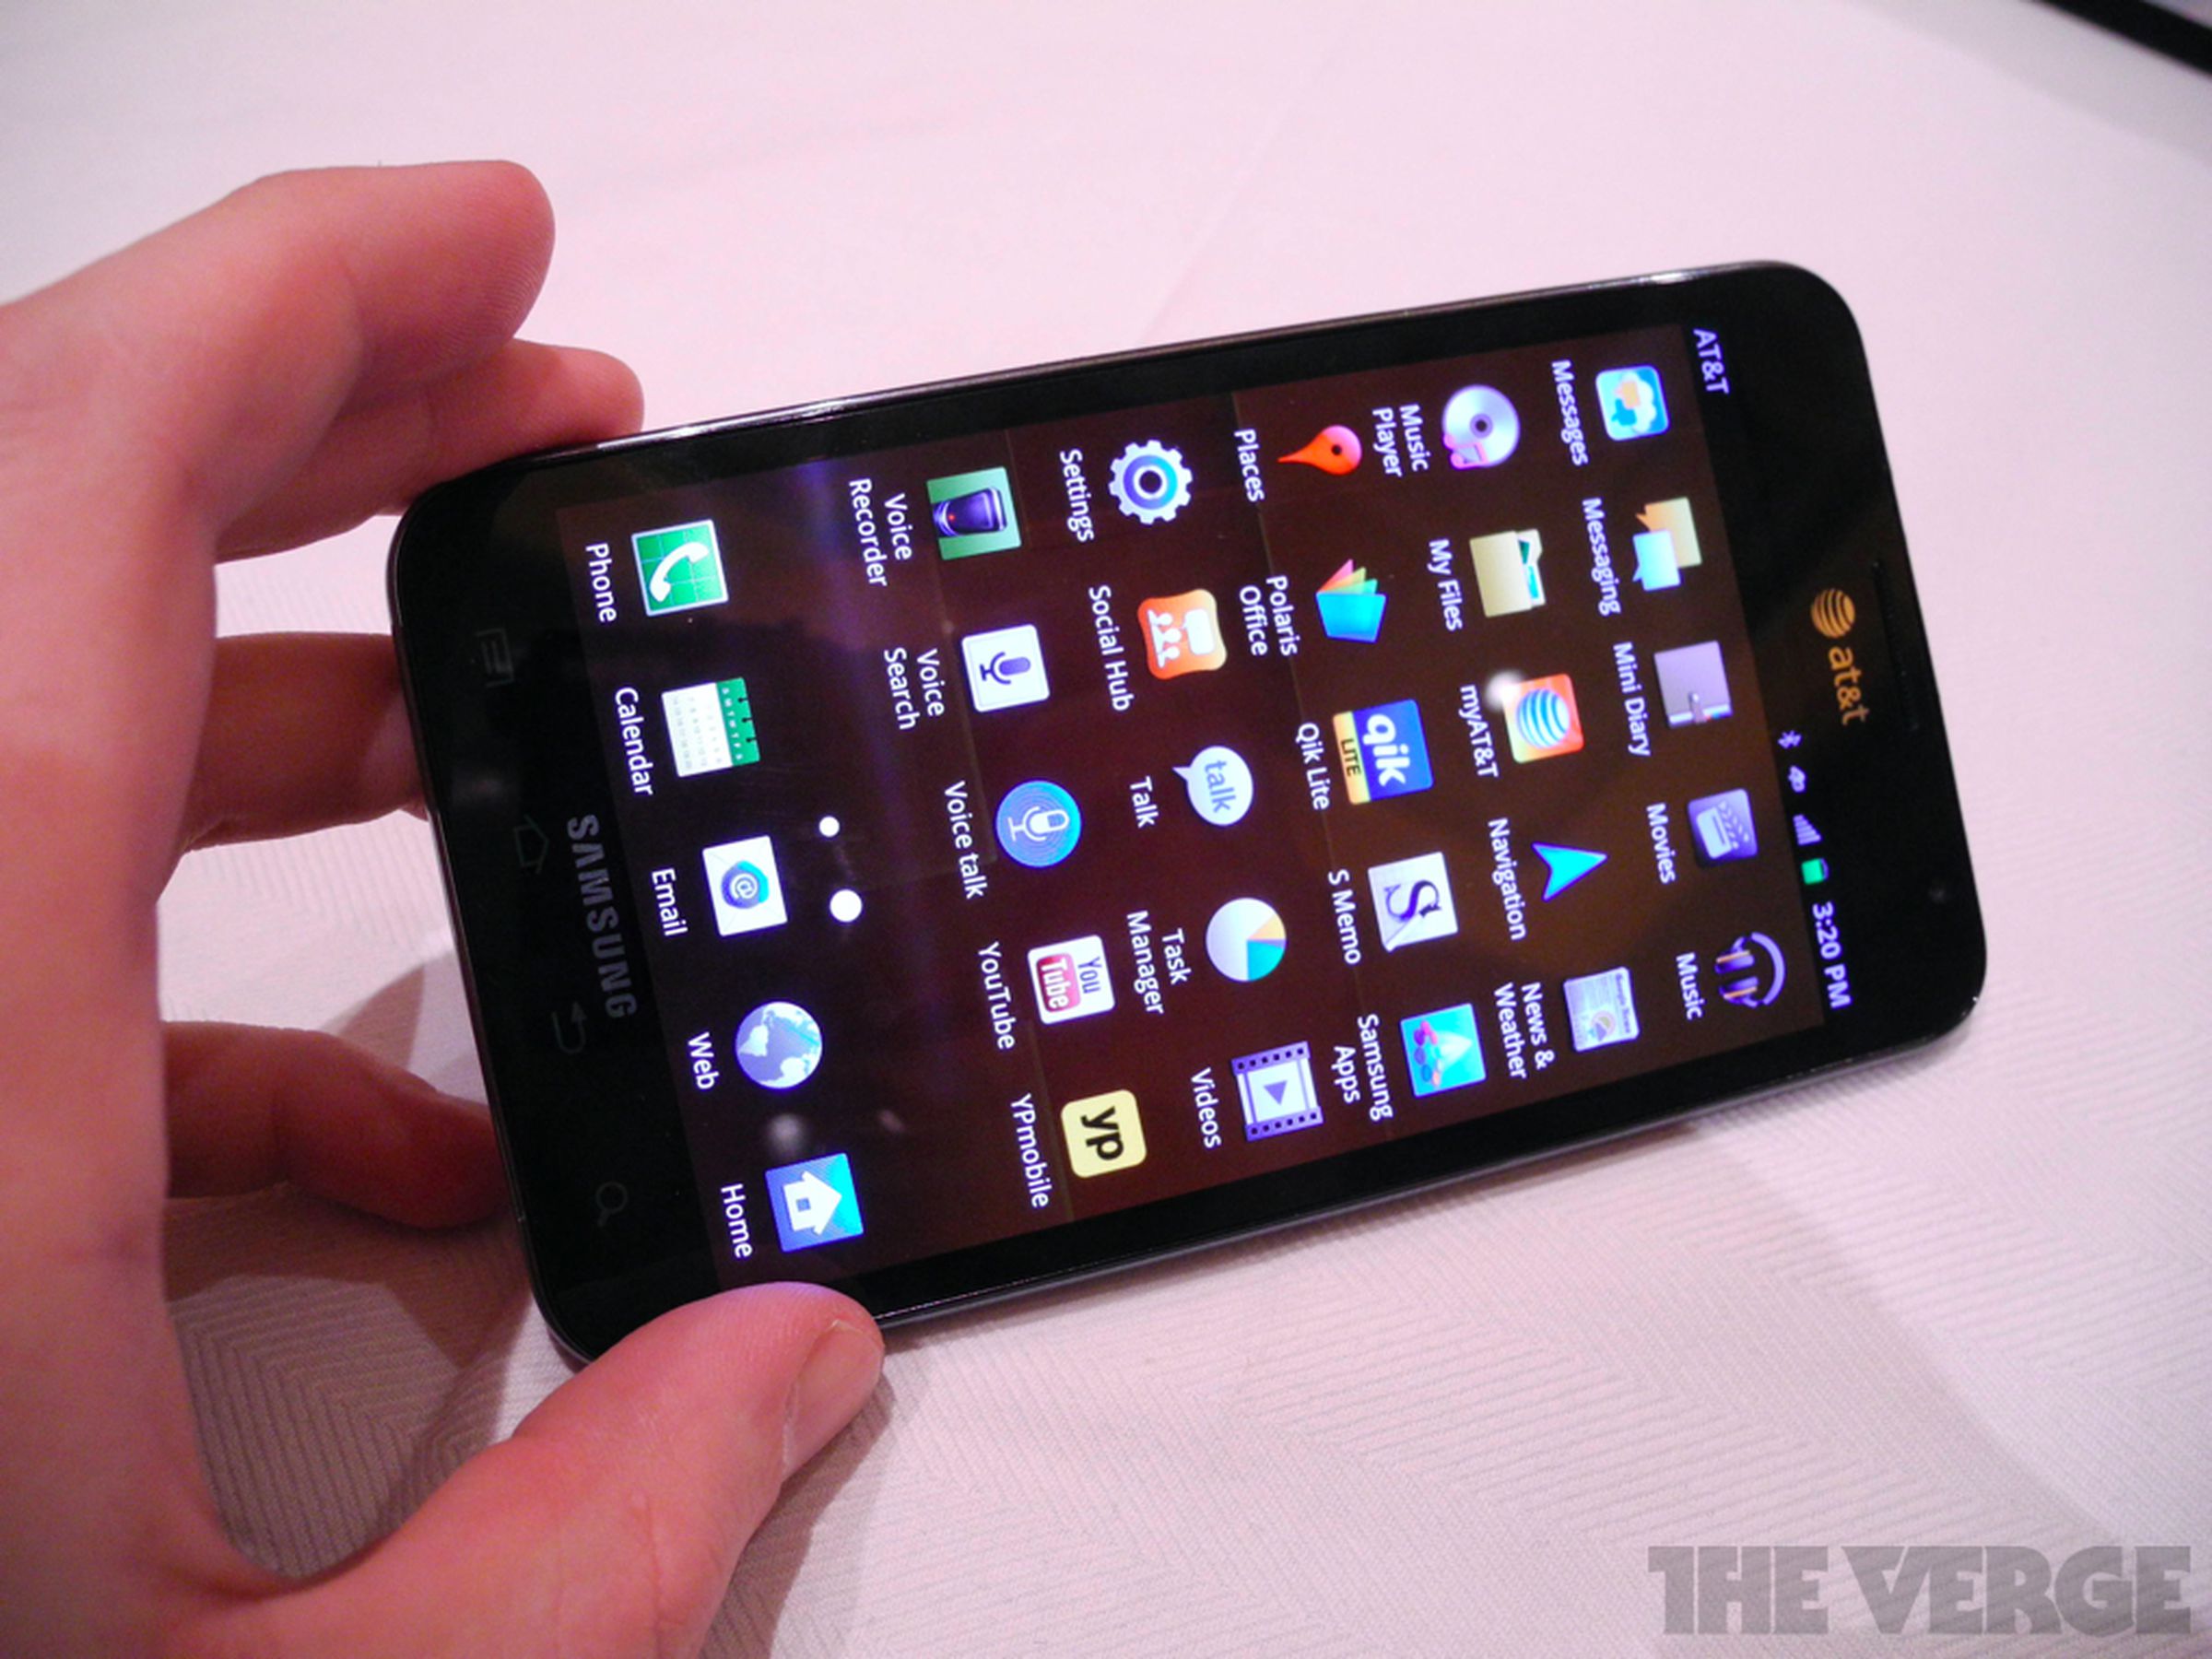 Samsung Galaxy Note for AT&T hands-on photos